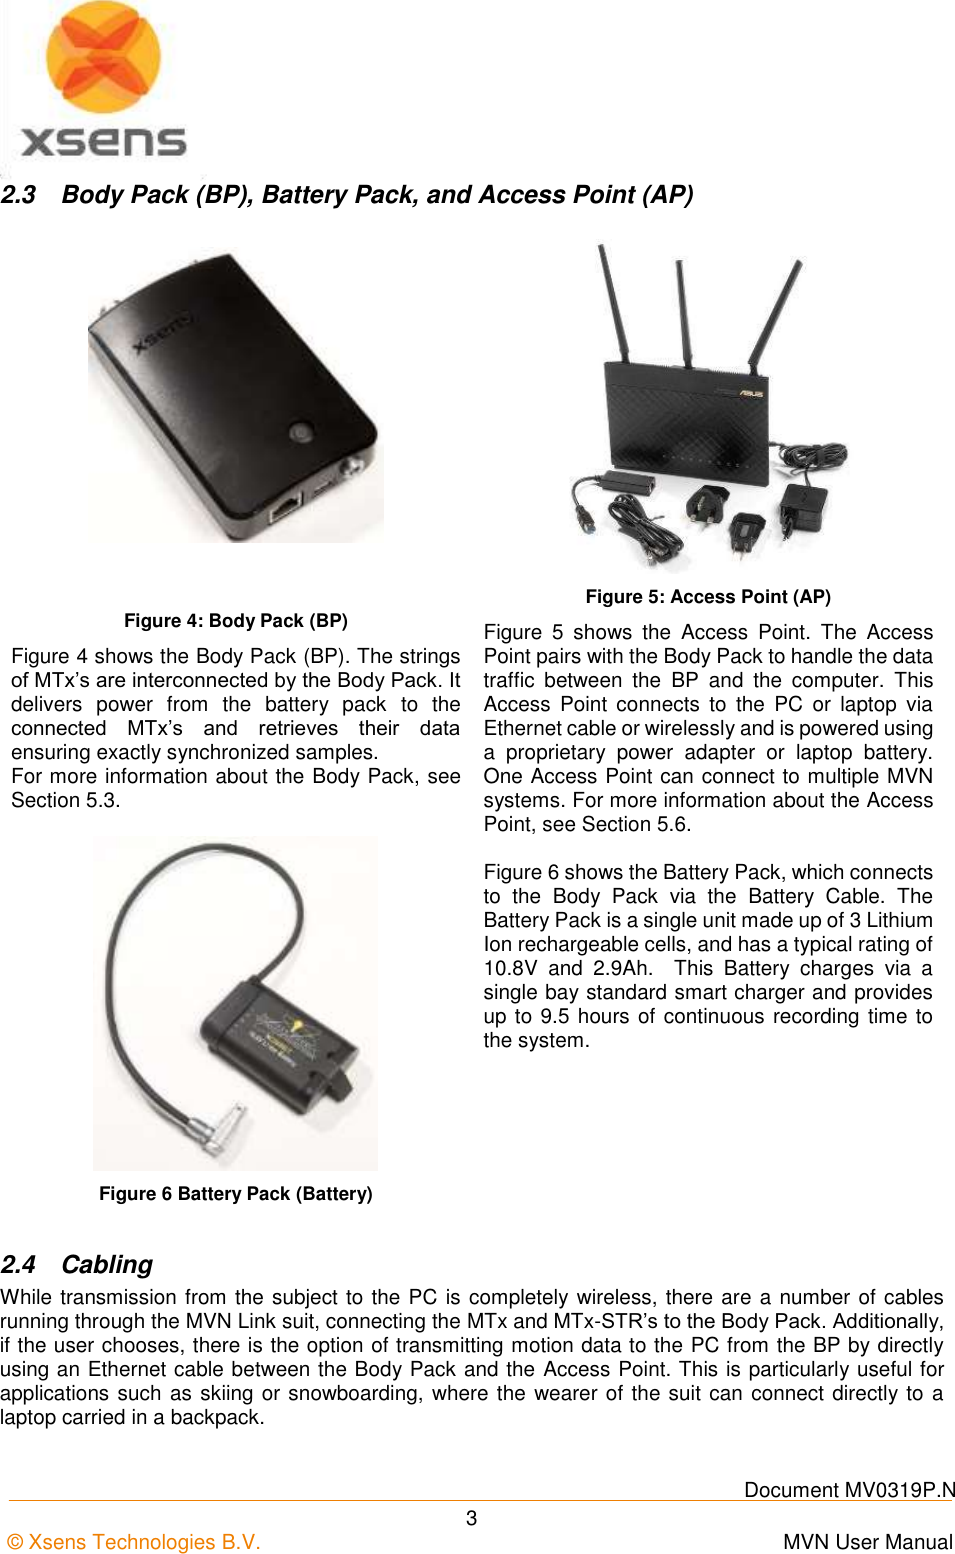    Document MV0319P.N © Xsens Technologies B.V.      MVN User Manual  3 2.3  Body Pack (BP), Battery Pack, and Access Point (AP)    Figure 4: Body Pack (BP) Figure 4 shows the Body Pack (BP). The strings of MTx’s are interconnected by the Body Pack. It delivers  power  from  the  battery  pack  to  the connected  MTx’s  and  retrieves  their  data ensuring exactly synchronized samples. For more information about the Body Pack, see Section 5.3. Figure 5: Access Point (AP) Figure  5  shows  the  Access  Point.  The  Access Point pairs with the Body Pack to handle the data traffic  between  the  BP  and  the  computer.  This Access  Point  connects  to  the  PC  or  laptop  via Ethernet cable or wirelessly and is powered using a  proprietary  power  adapter  or  laptop  battery.  One Access Point can connect to multiple MVN systems. For more information about the Access Point, see Section 5.6.  Figure 6 Battery Pack (Battery)  Figure 6 shows the Battery Pack, which connects to  the  Body  Pack  via  the  Battery  Cable.  The Battery Pack is a single unit made up of 3 Lithium Ion rechargeable cells, and has a typical rating of 10.8V  and  2.9Ah.    This  Battery  charges  via  a single bay standard smart charger and provides up to 9.5 hours of continuous recording time to the system. 2.4  Cabling While transmission from the subject to the PC is completely wireless, there are a number of cables running through the MVN Link suit, connecting the MTx and MTx-STR’s to the Body Pack. Additionally, if the user chooses, there is the option of transmitting motion data to the PC from the BP by directly using an Ethernet cable between the Body Pack and the Access Point. This is particularly useful for applications such as skiing or snowboarding, where the wearer of the suit can connect directly to a laptop carried in a backpack.   